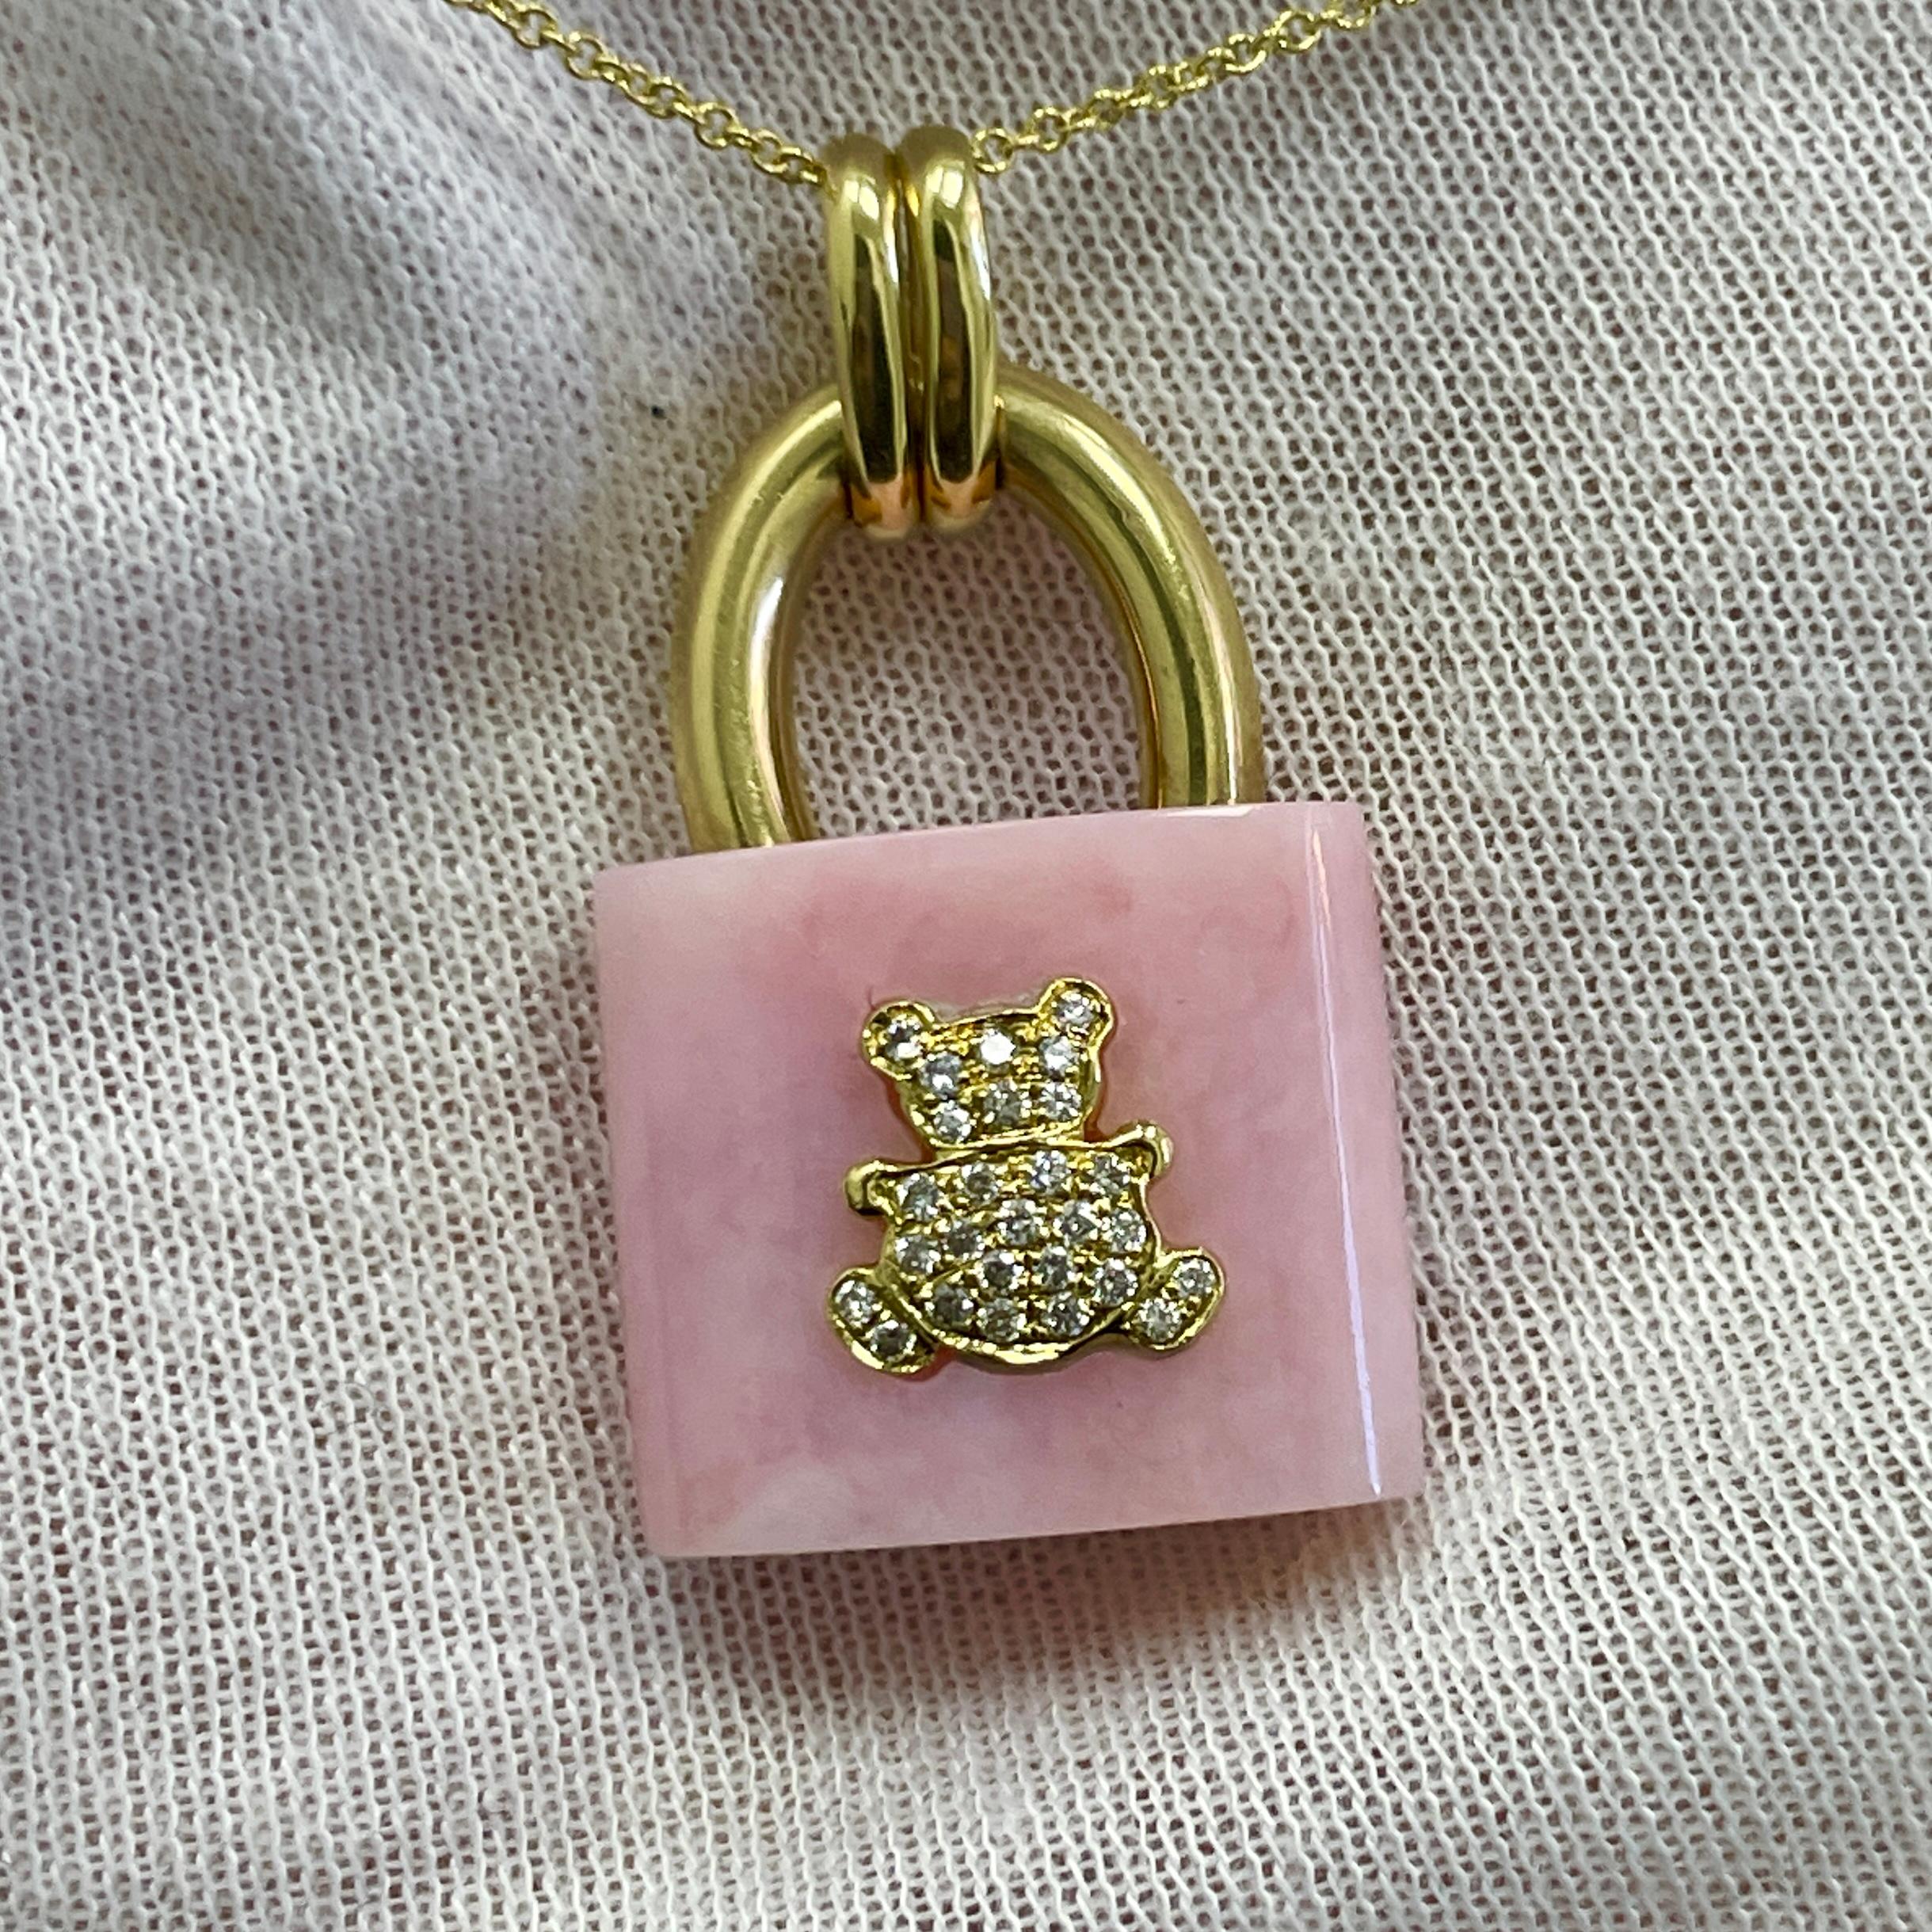 Pink opal and 18K yellow gold lock shape with 0.16Ct of diamond crusted teddy bear. Perfect gift any young lady's birthday, graduation or even having a baby.